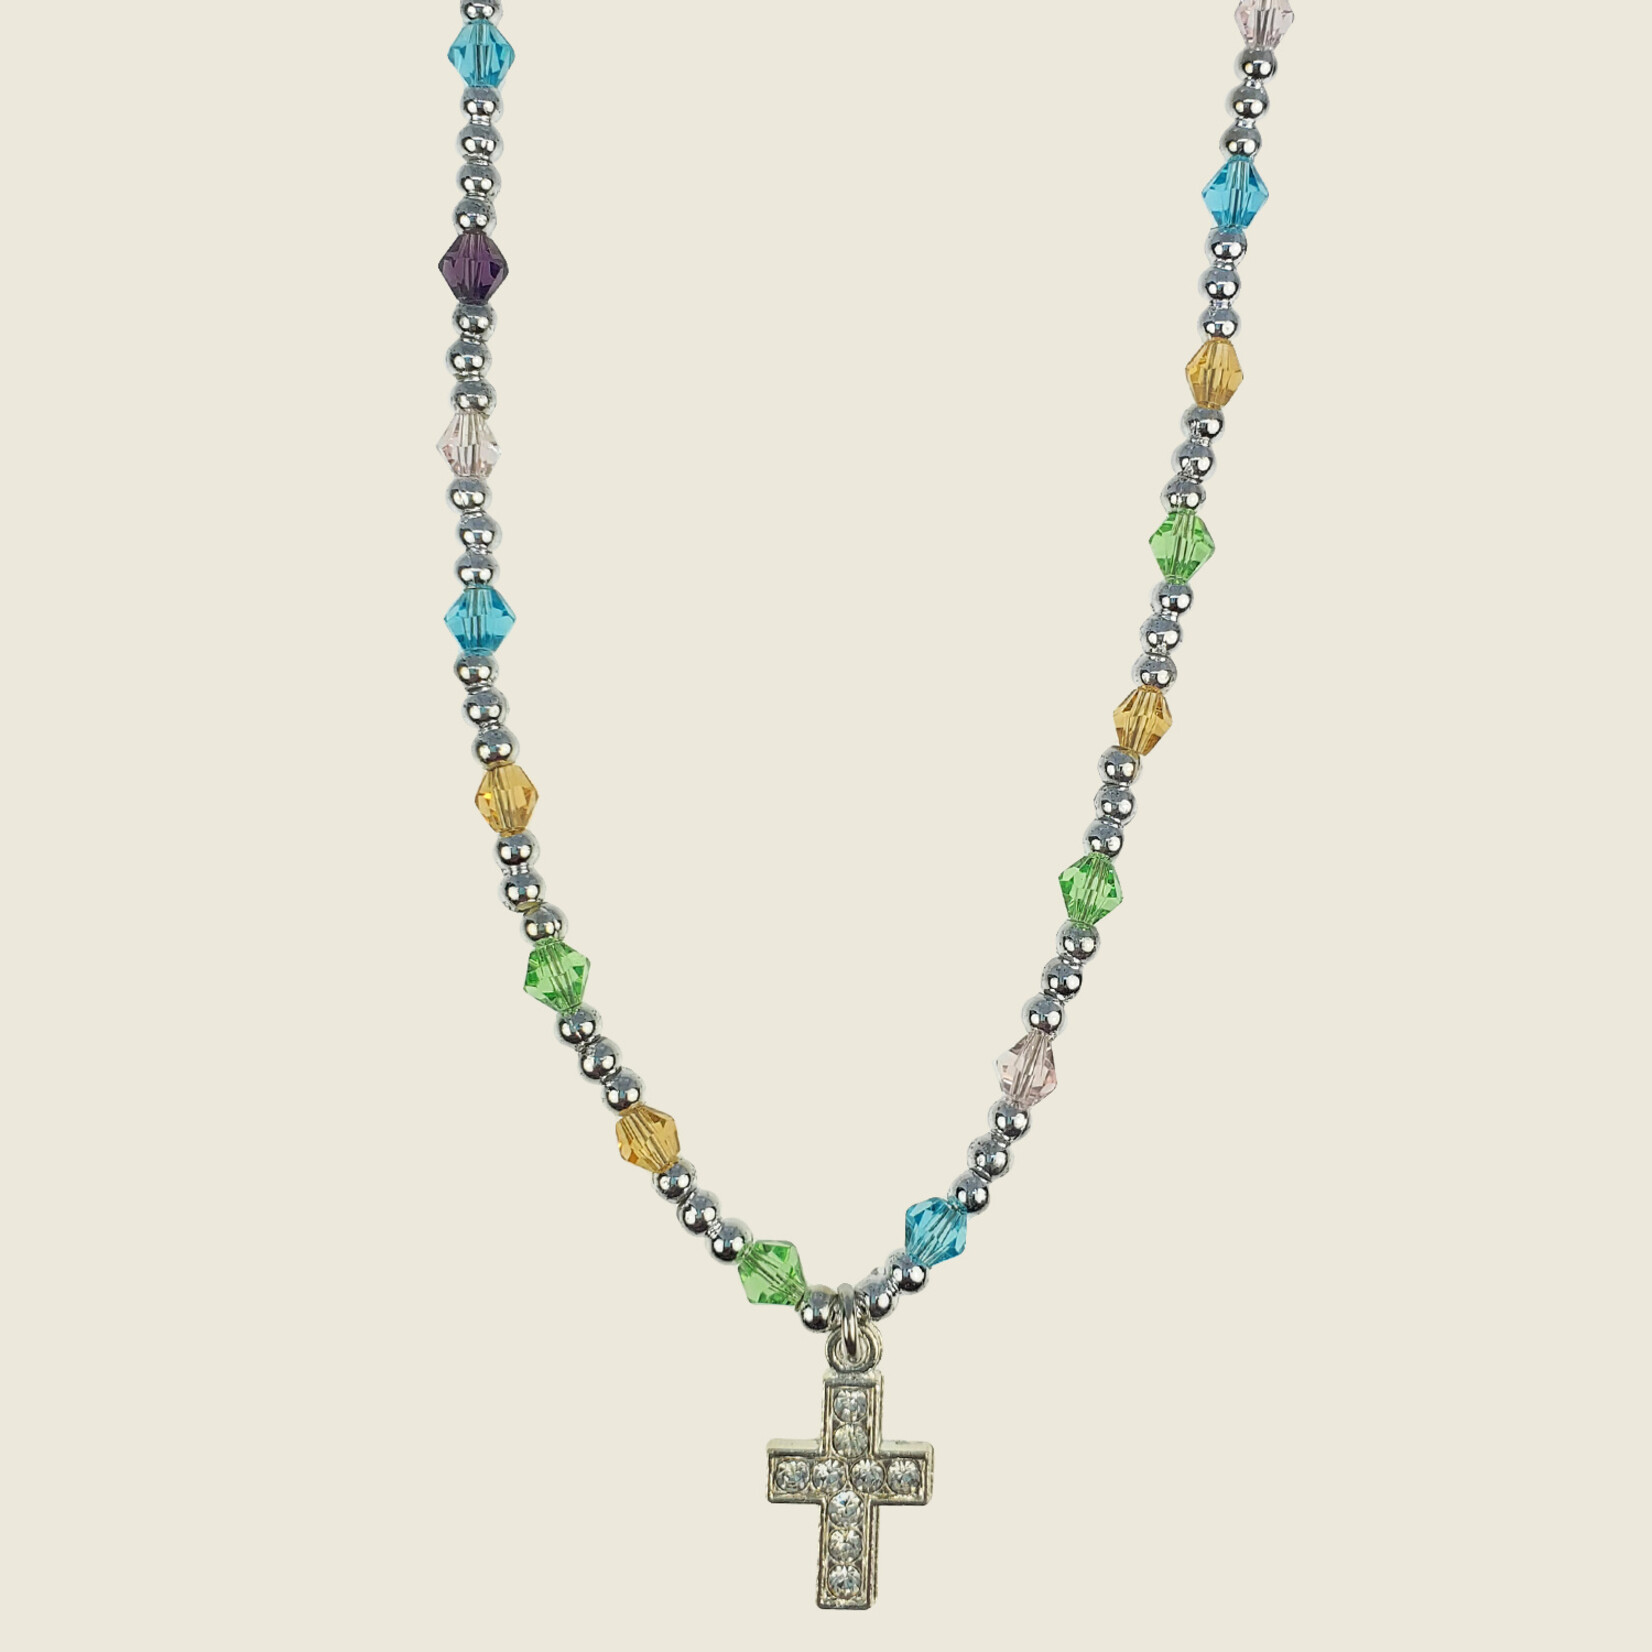 Multi Color Crystal Bead Necklace With Cross